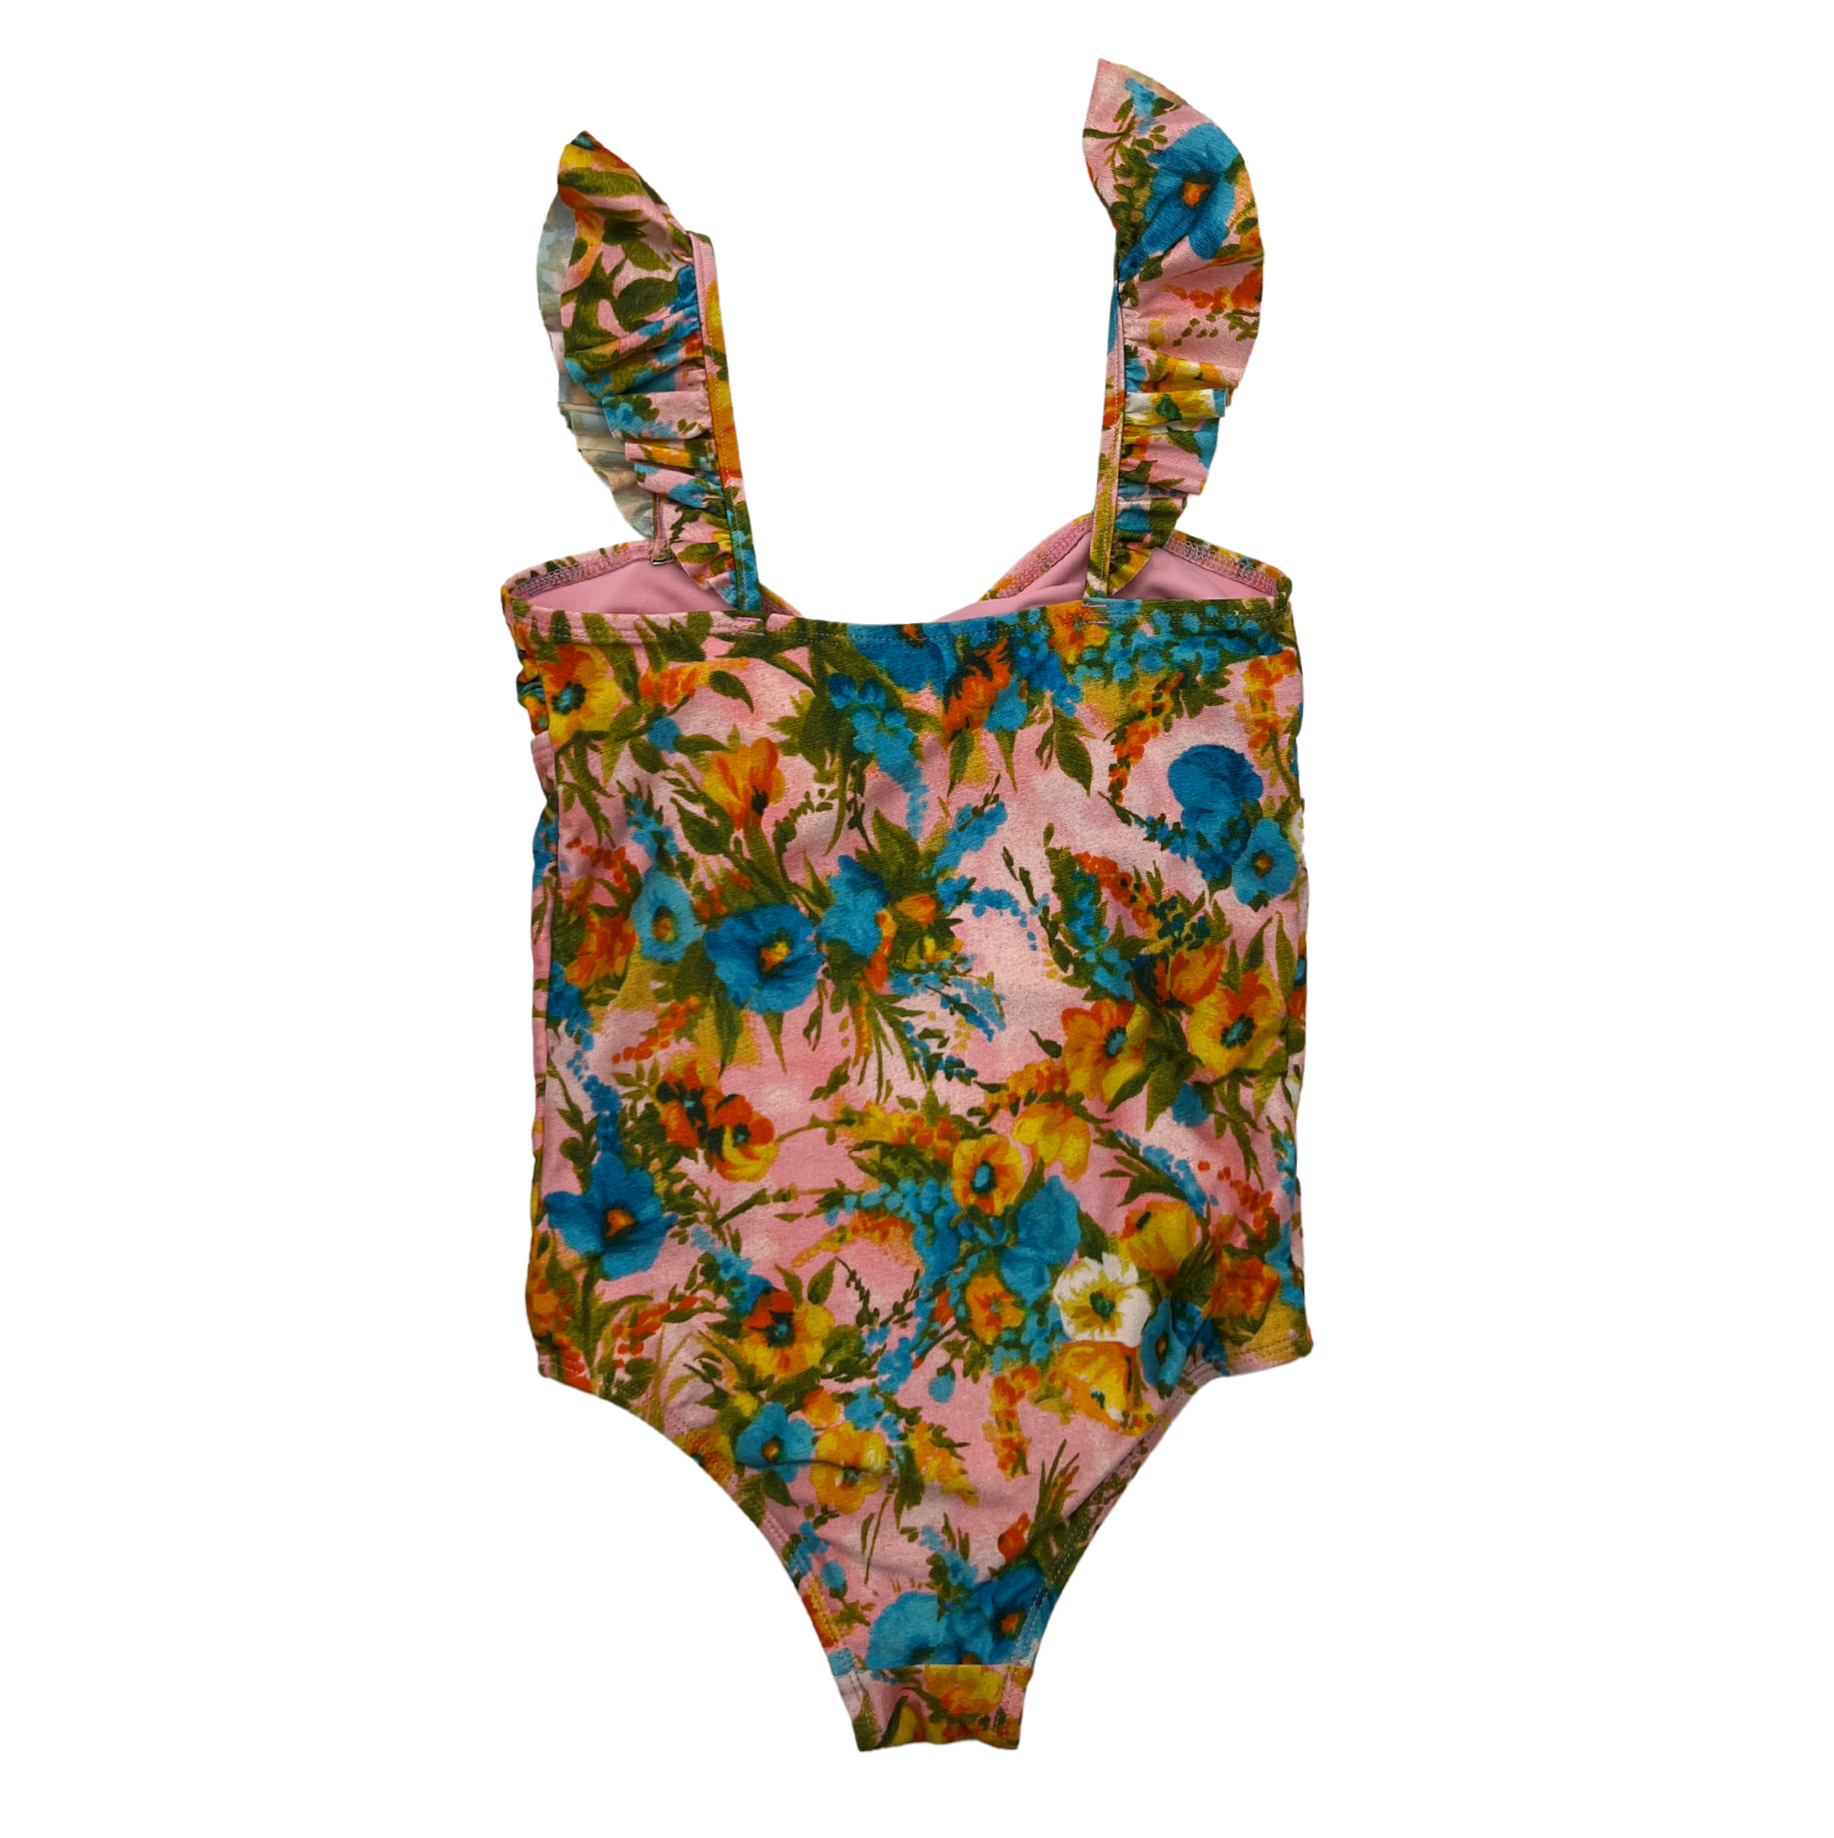 ZIMMERMANN - Floral one-piece swimsuit - 8 years old